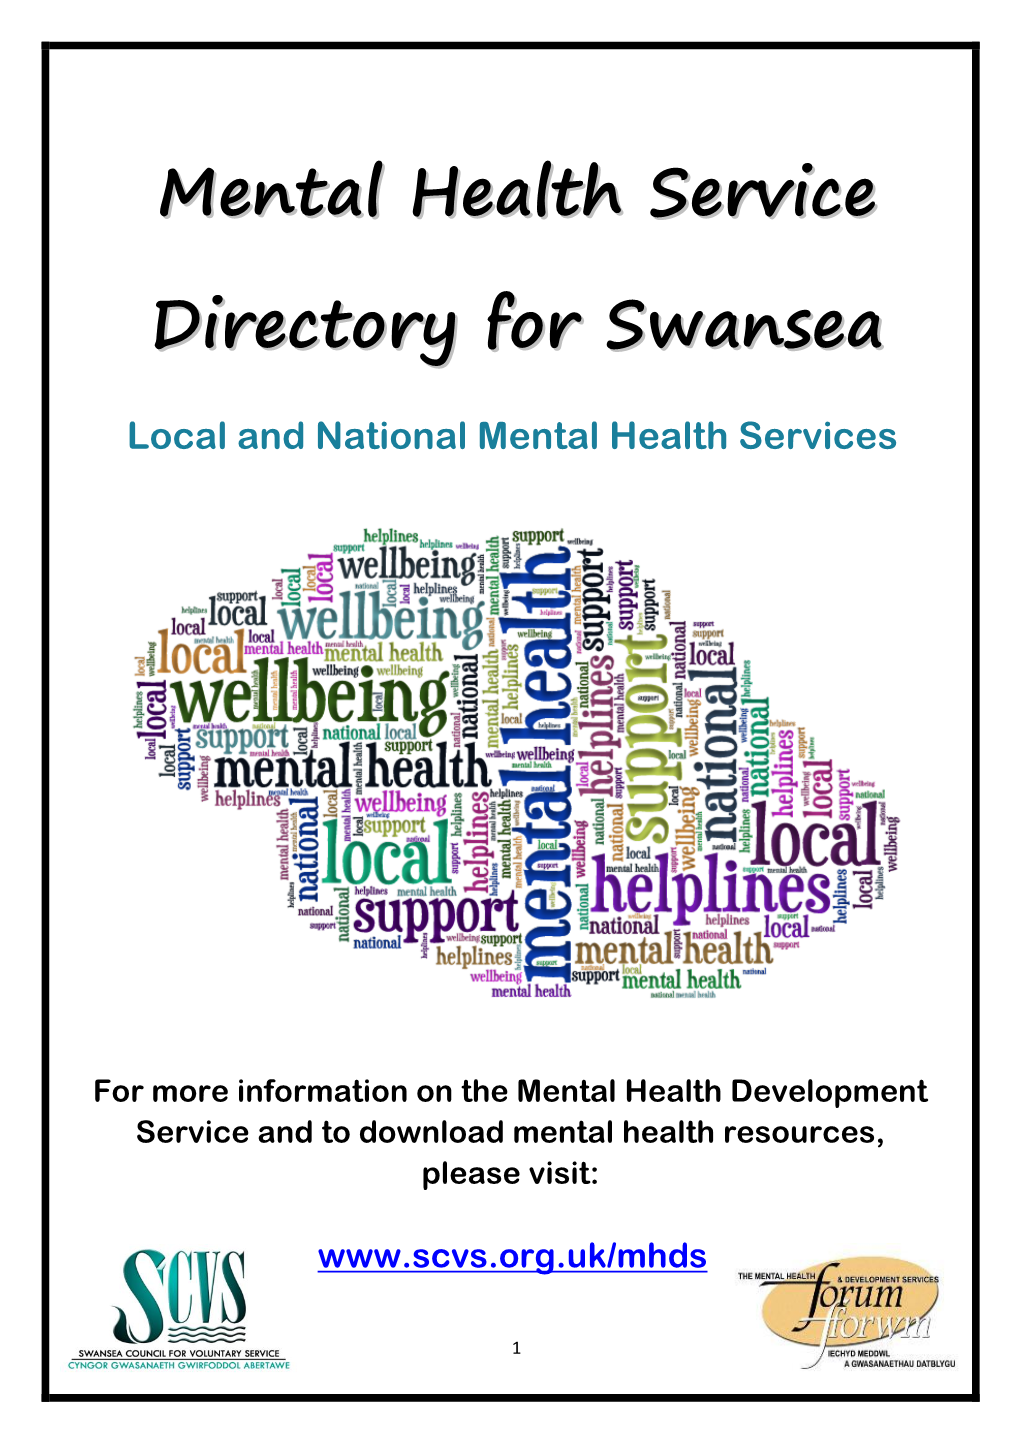 Mental Health Service Directory for Swansea